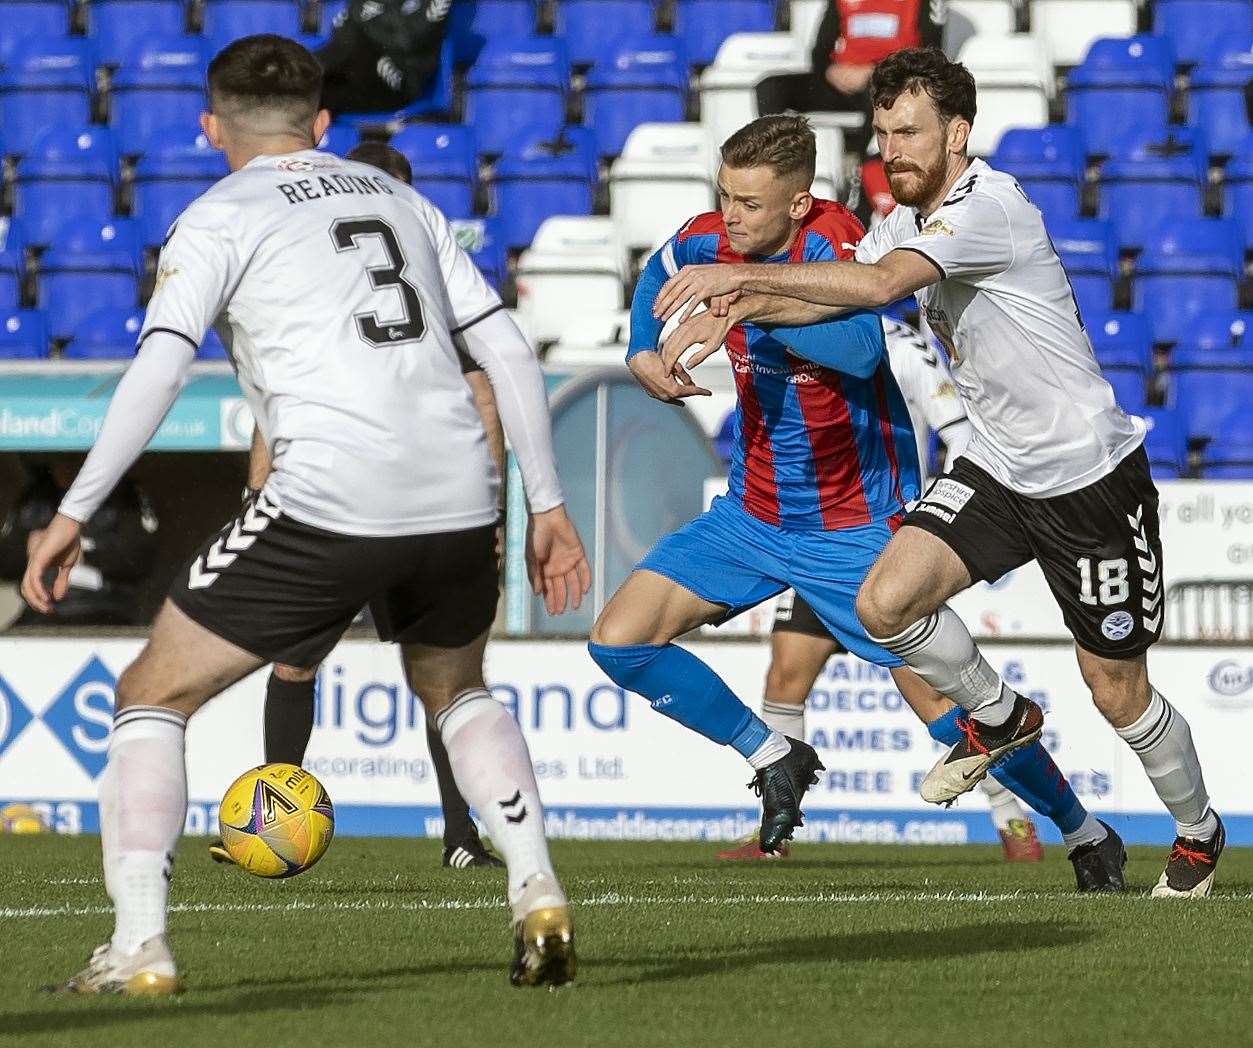 Roddy MacGregor is one of the more experienced teenagers in the Caley Thistle squad. Pictures: Ken Macpherson